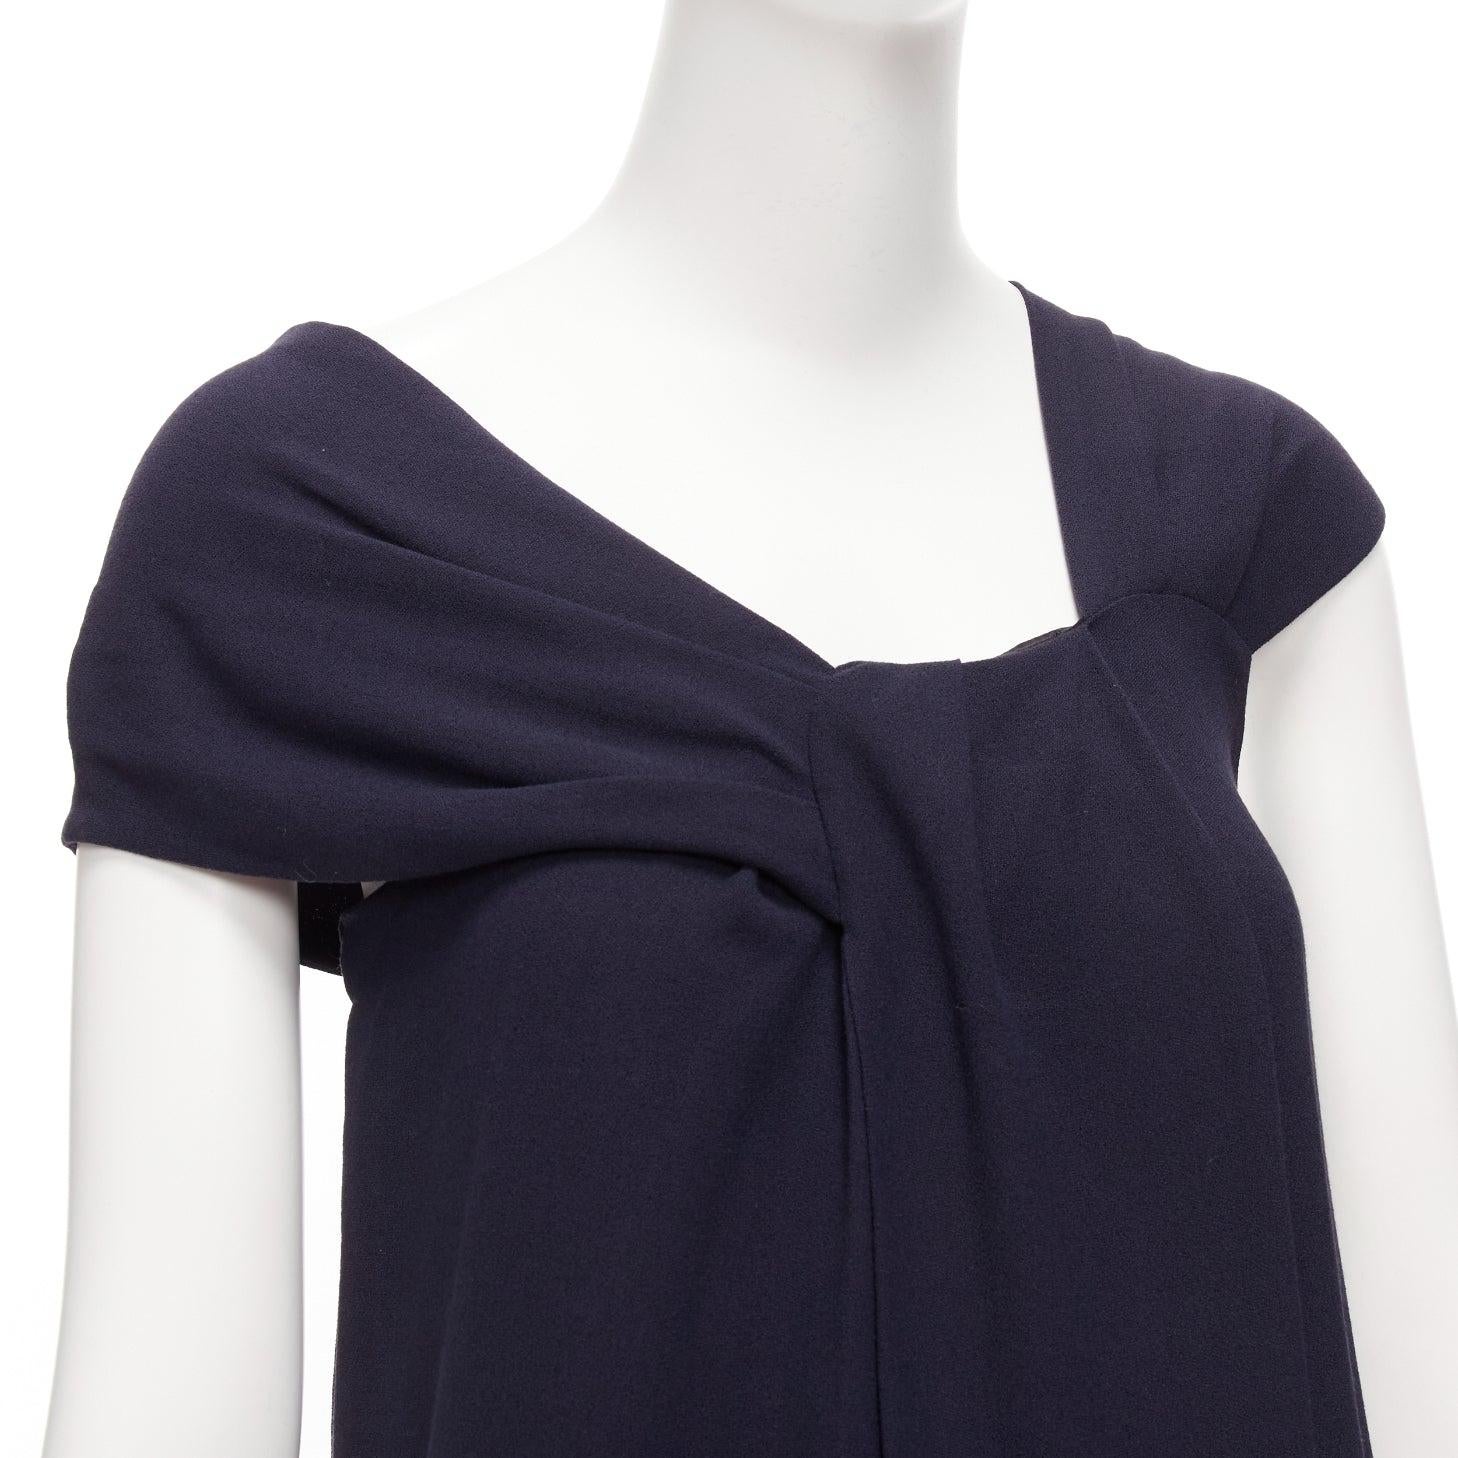 FENDI navy viscose wool asymmetric pleated collar silk lined mini dress IT38 XS
Reference: NILI/A00035
Brand: Fendi
Material: Viscose, Wool
Color: Navy
Pattern: Solid
Closure: Pullover
Lining: Black Silk
Made in: Italy

CONDITION:
Condition: